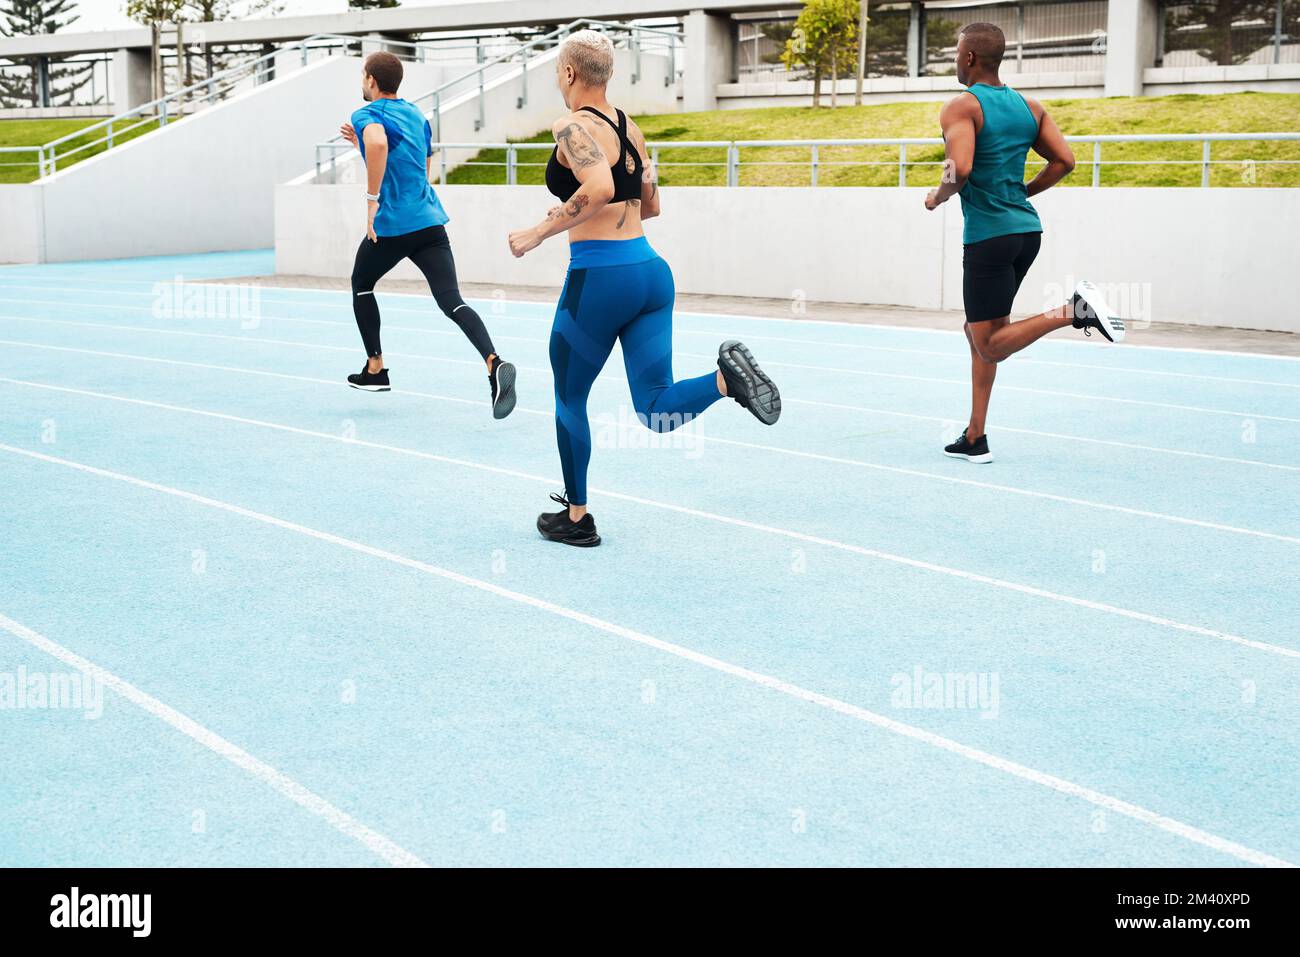 No pain no gain. Full length shot of a diverse group of athletes racing each other during an outdoor track and field workout session. Stock Photo